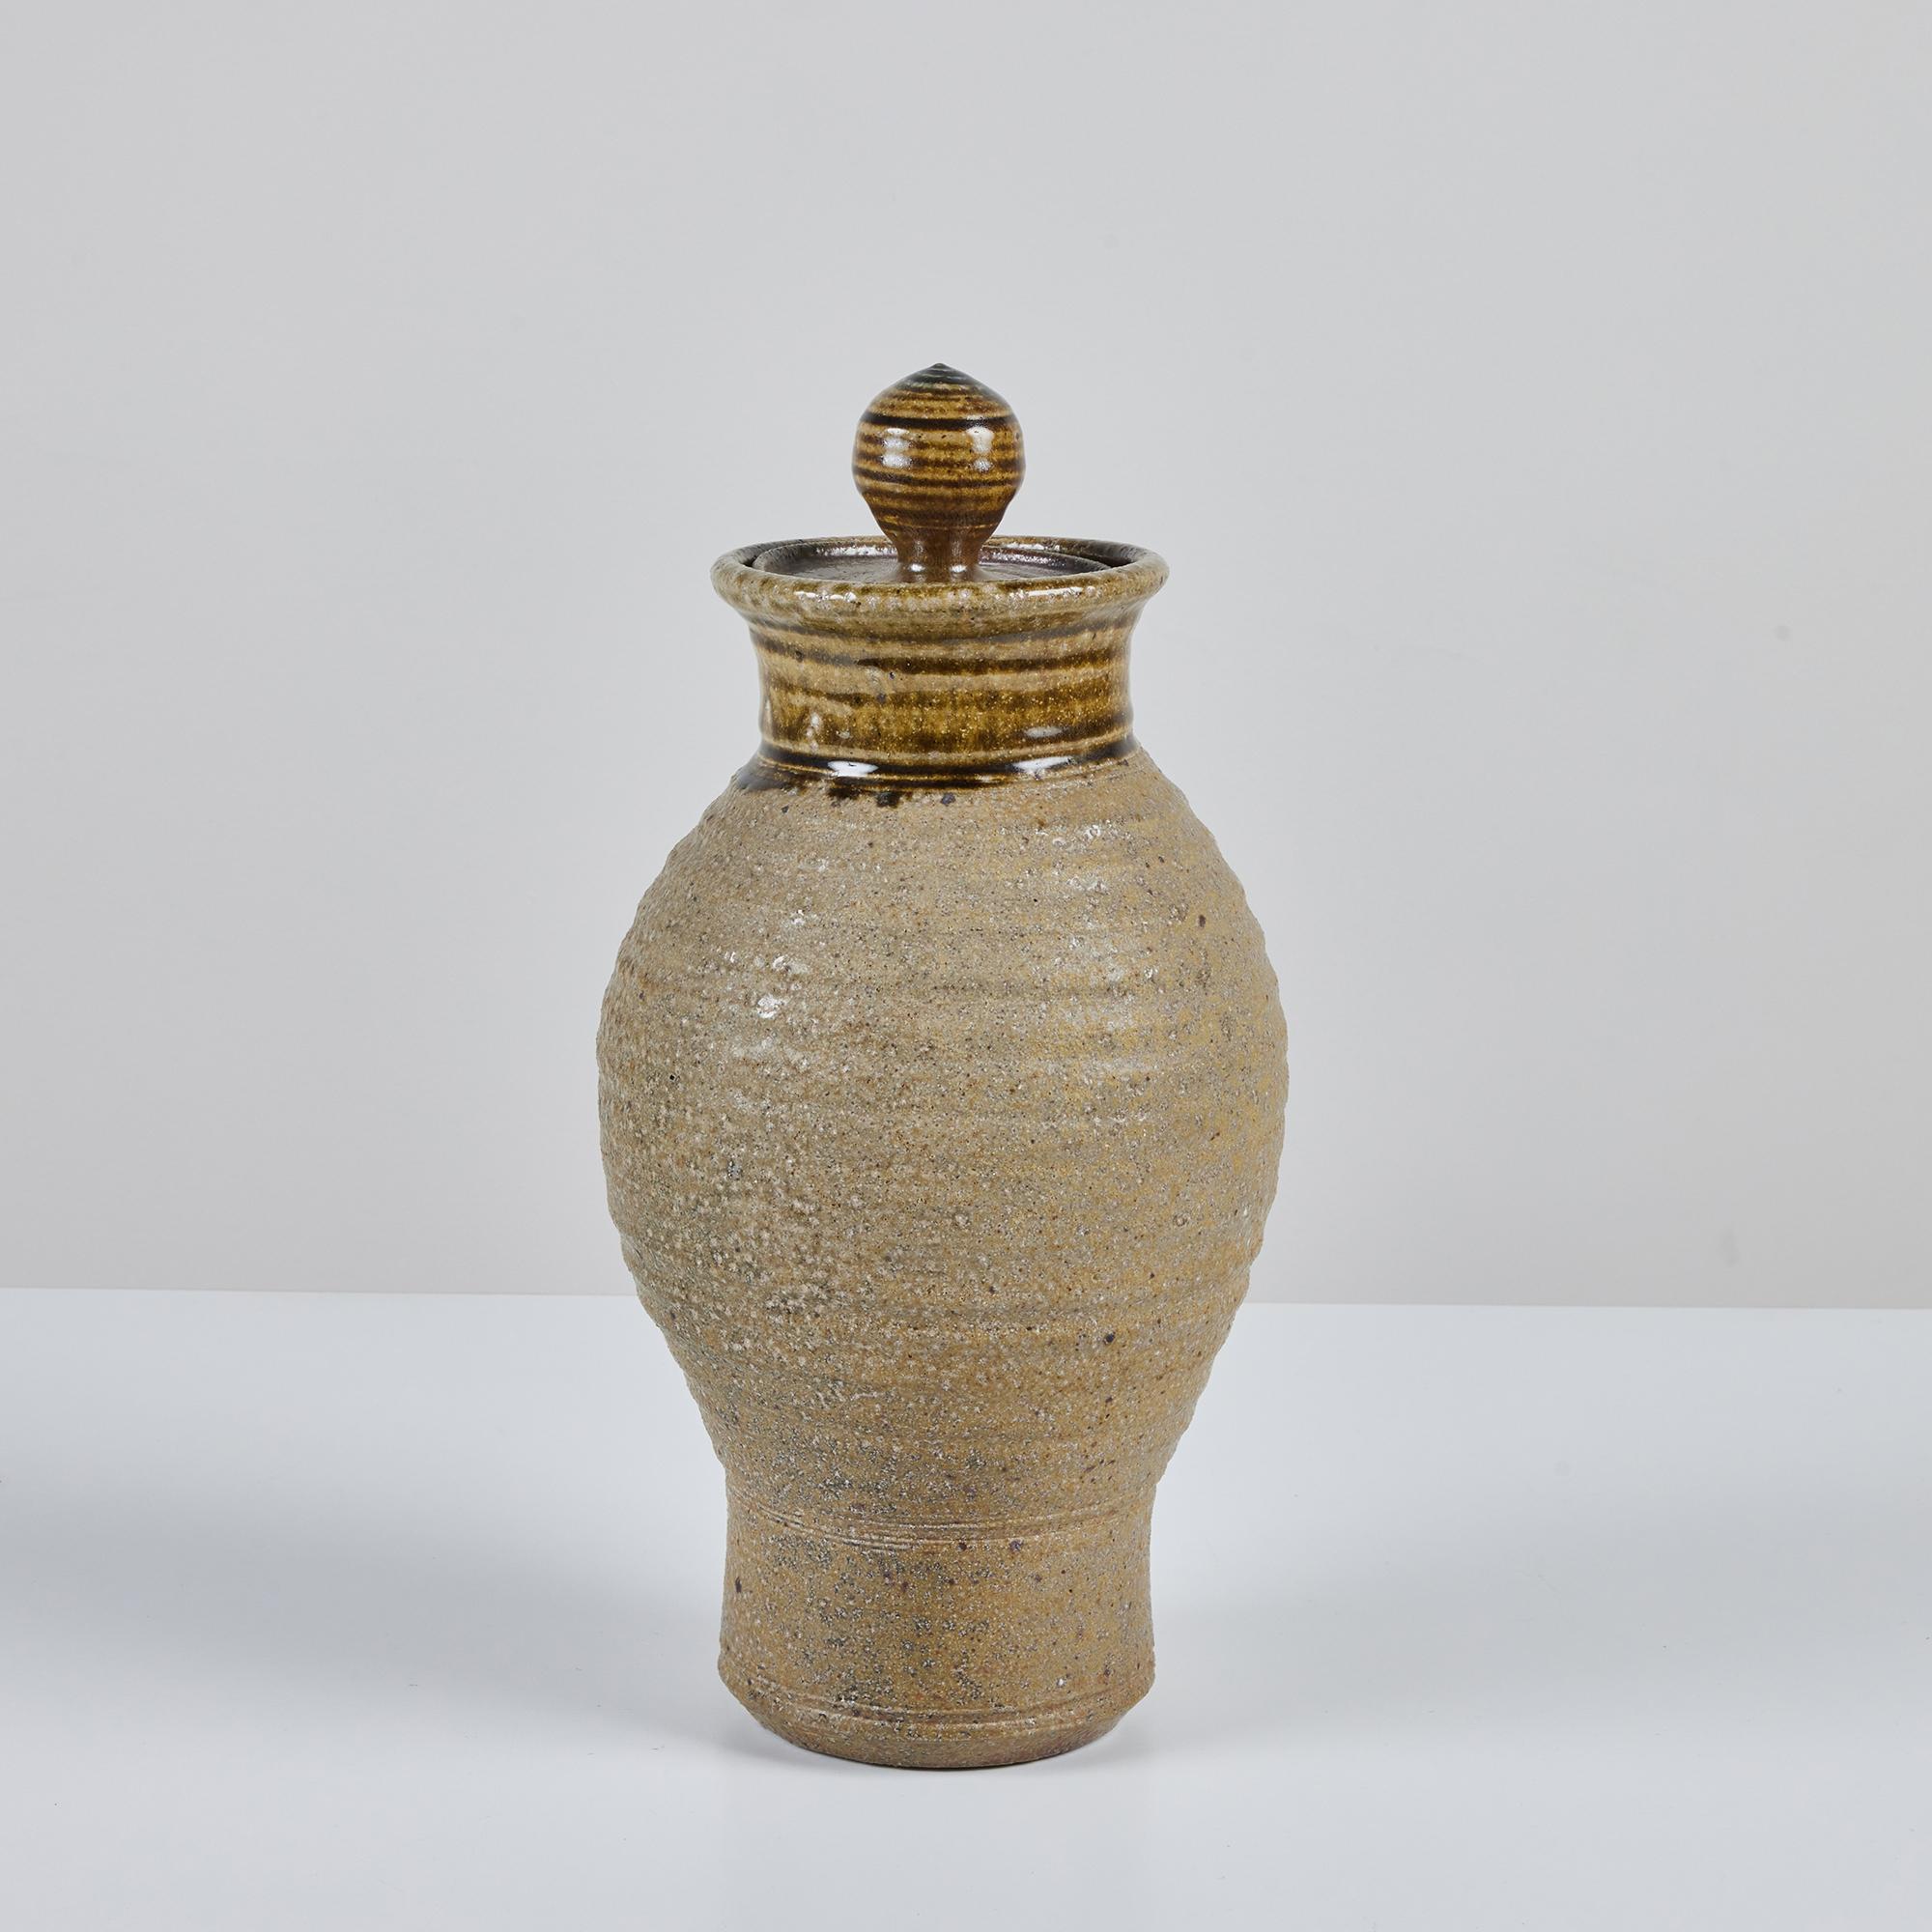 Hand thrown stoneware vessel with a textured ribbed body. This piece features an all over earthtone glaze with the top of the vessel and lid in darker shades of brown. The lid has a glossy finish with linear detailing around the neck and sphere lid